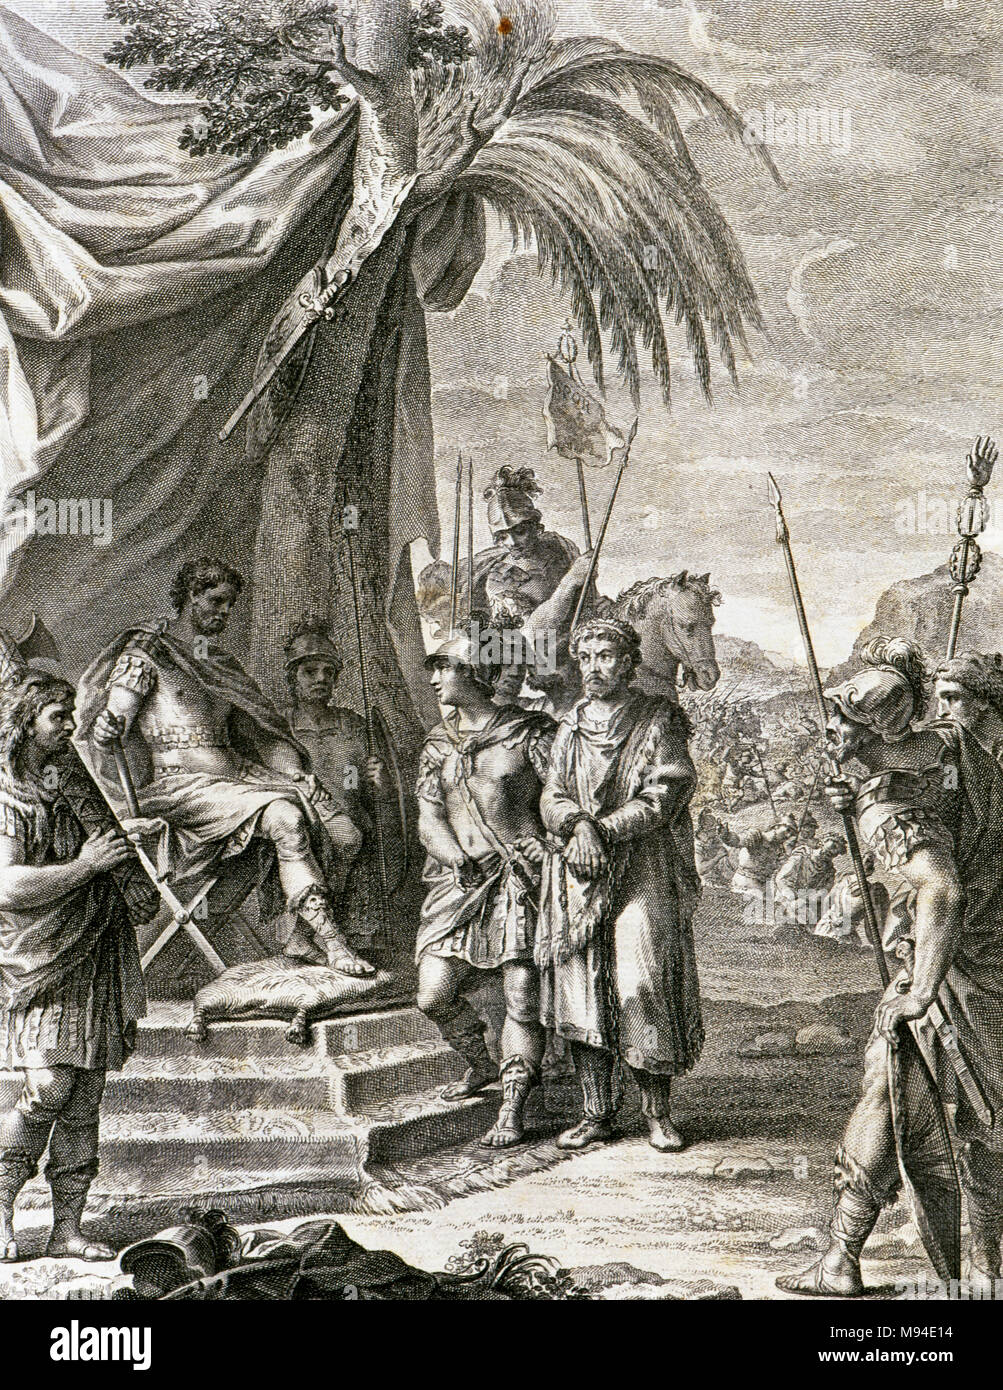 Sallust (Gaius Sallustius Crispus) (ca.86-35 BC). Roman historian and politician. King Bocchus I of Mauretania (from about 110 to between 91 and 81 BC), ally of Rome, gives to Numidian King Jugurtha to the Romans. Engraving from The War of Jugurtha. Edition of 1772. Stock Photo